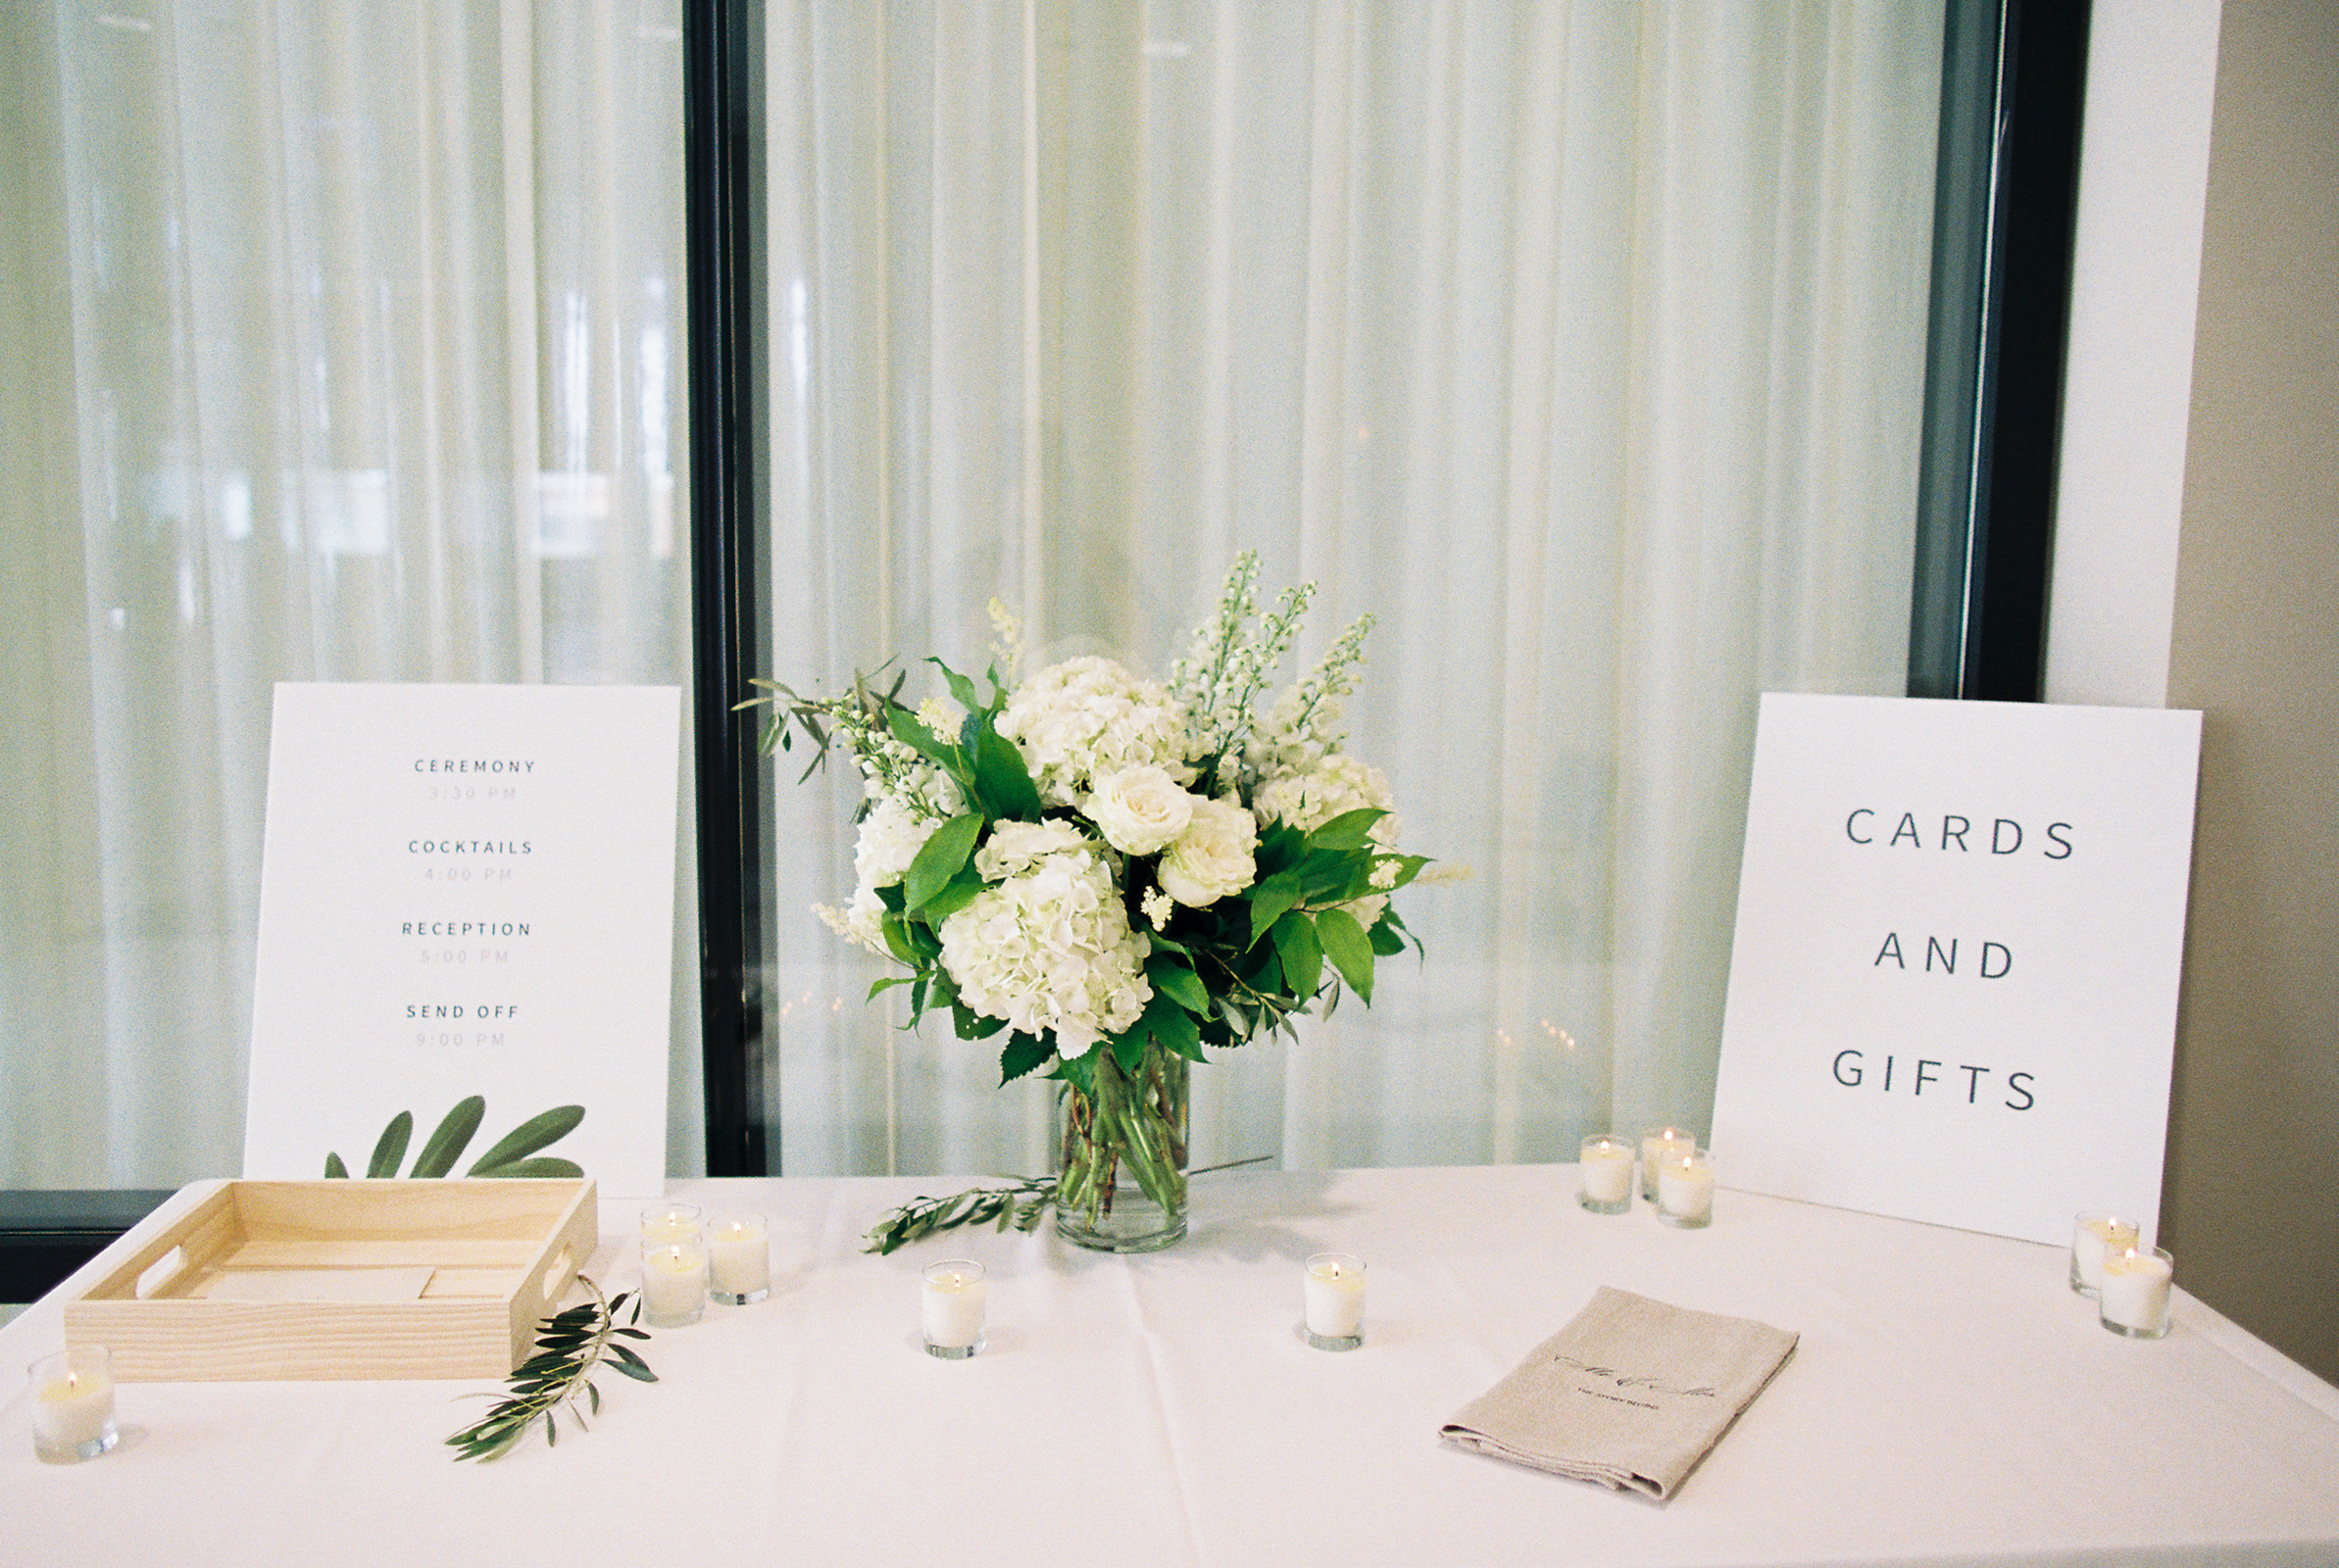 Cards and gifts table for white and green wedding at Greenhouse Loft with candles and arrangement of white hydrangea, garden roses, and eucalyptus.